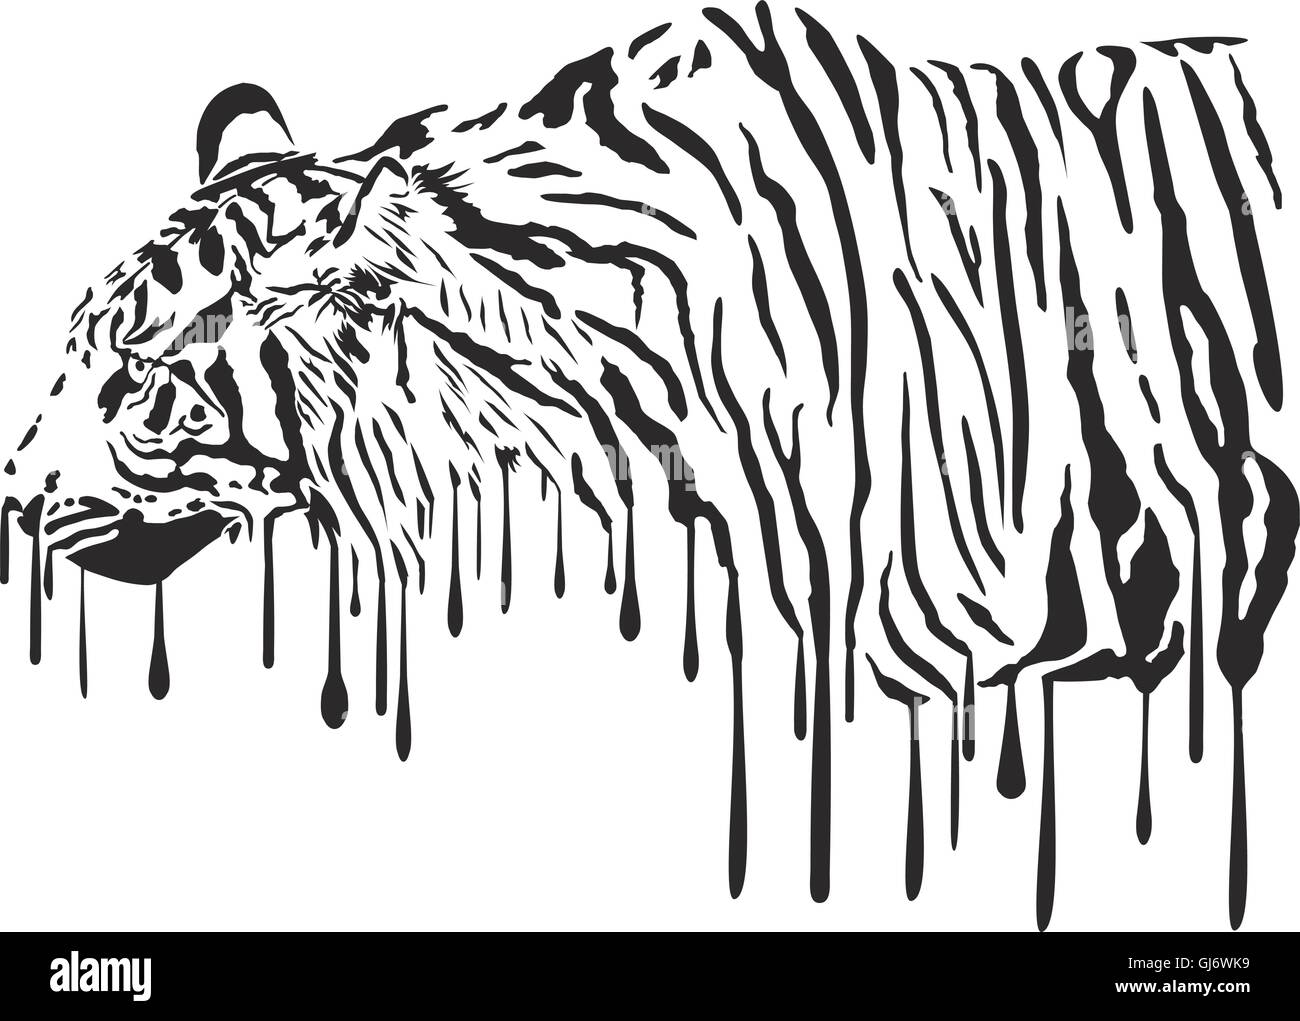 Tiger, abstract painting on a white background Stock Vector